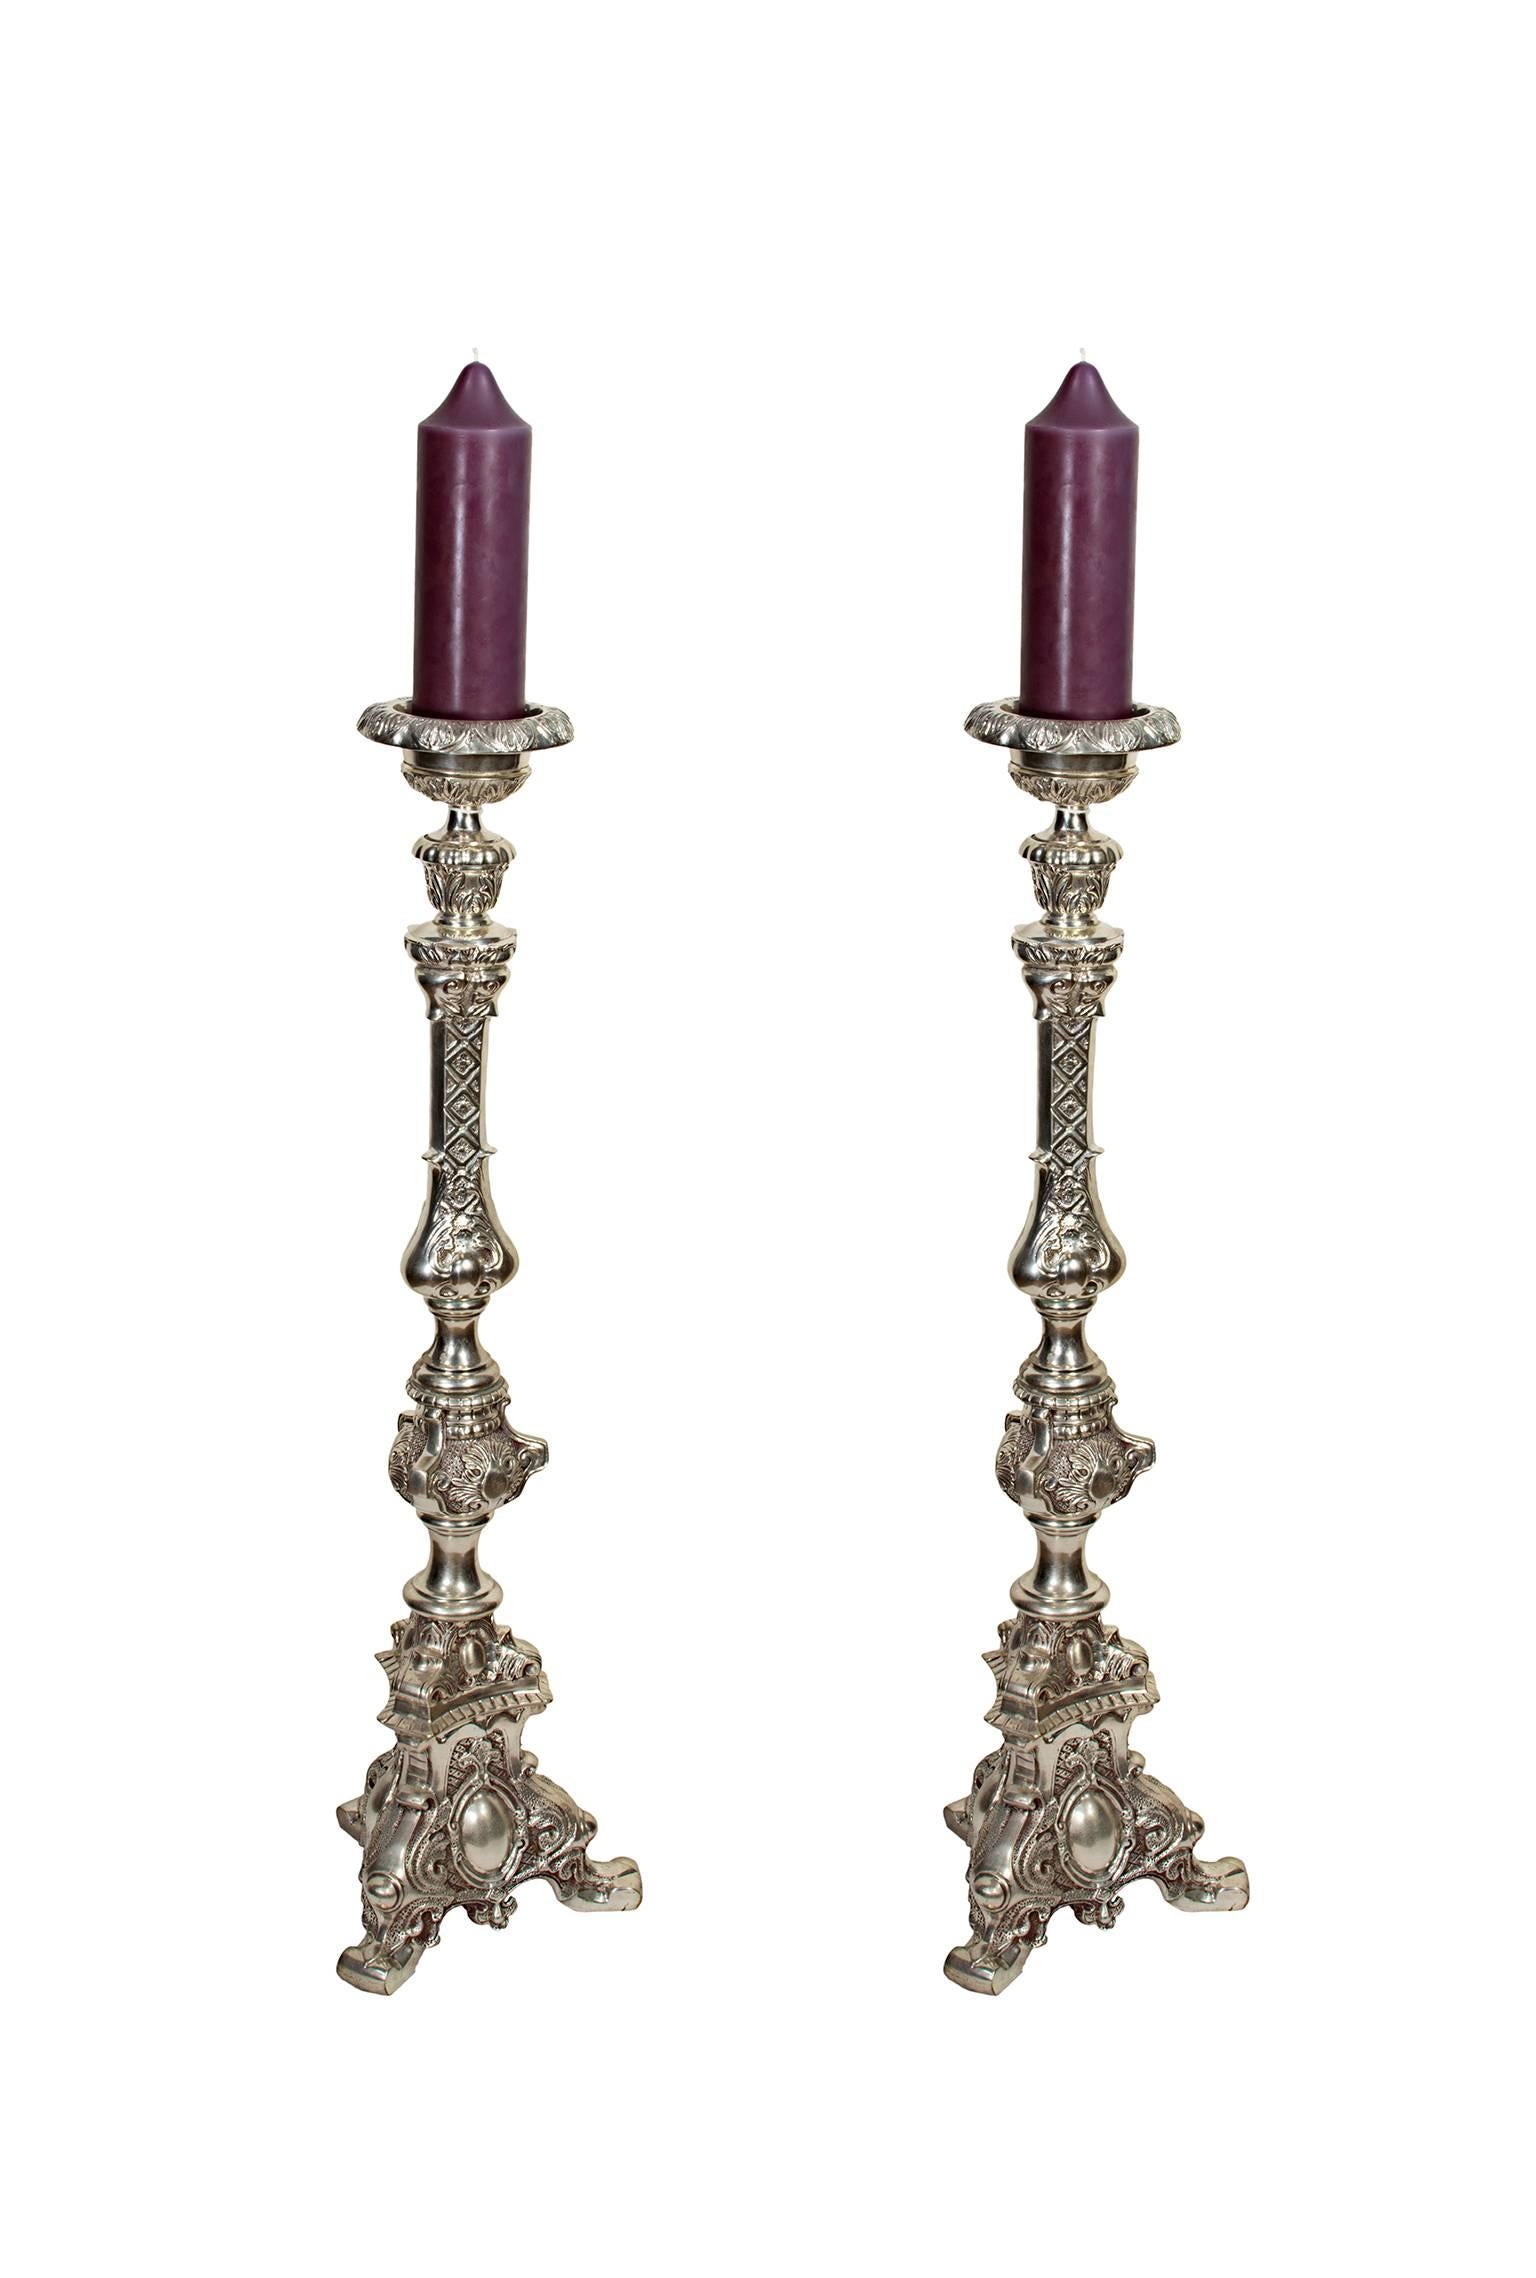 "Candlesticks, silver-plated bronze, " Two Candlesticks - Art by Unknown